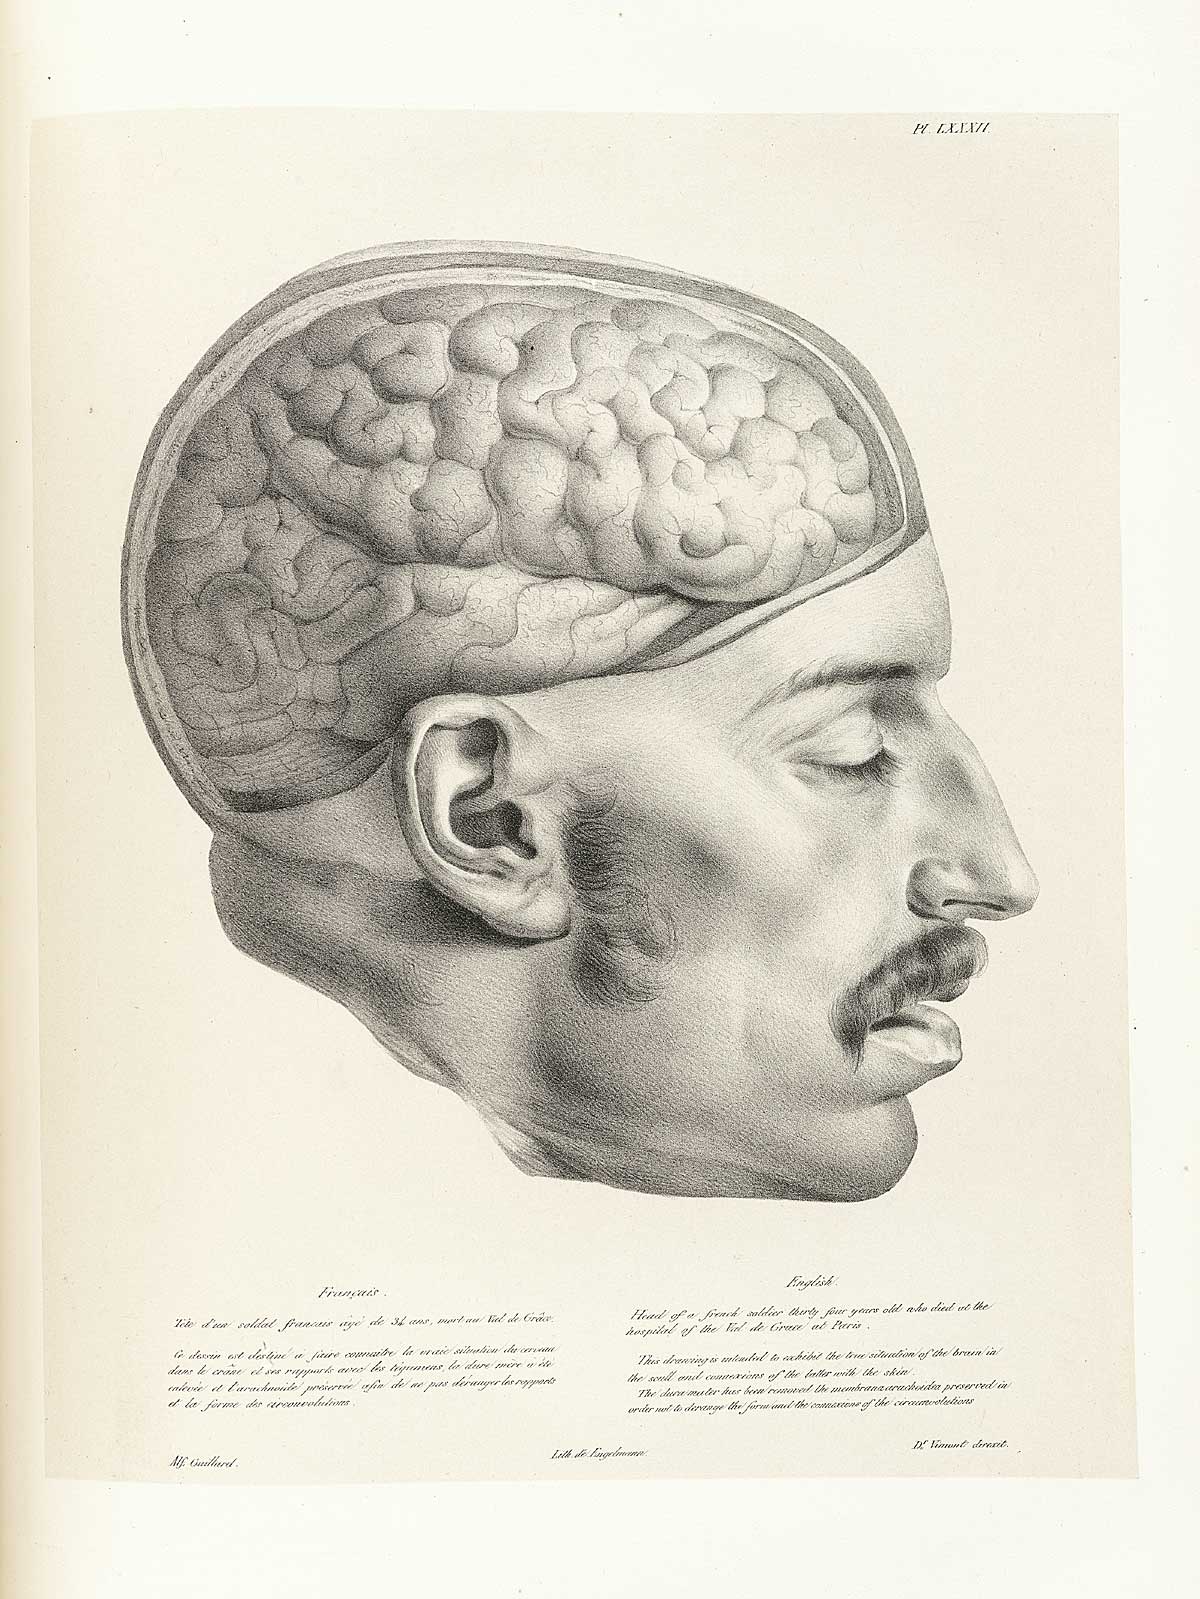 Table 82 of Joseph Vimont's Traité de phrénologie humaine et comparée, featuring the side view of a the head of a French solider, with the dura mater removed.